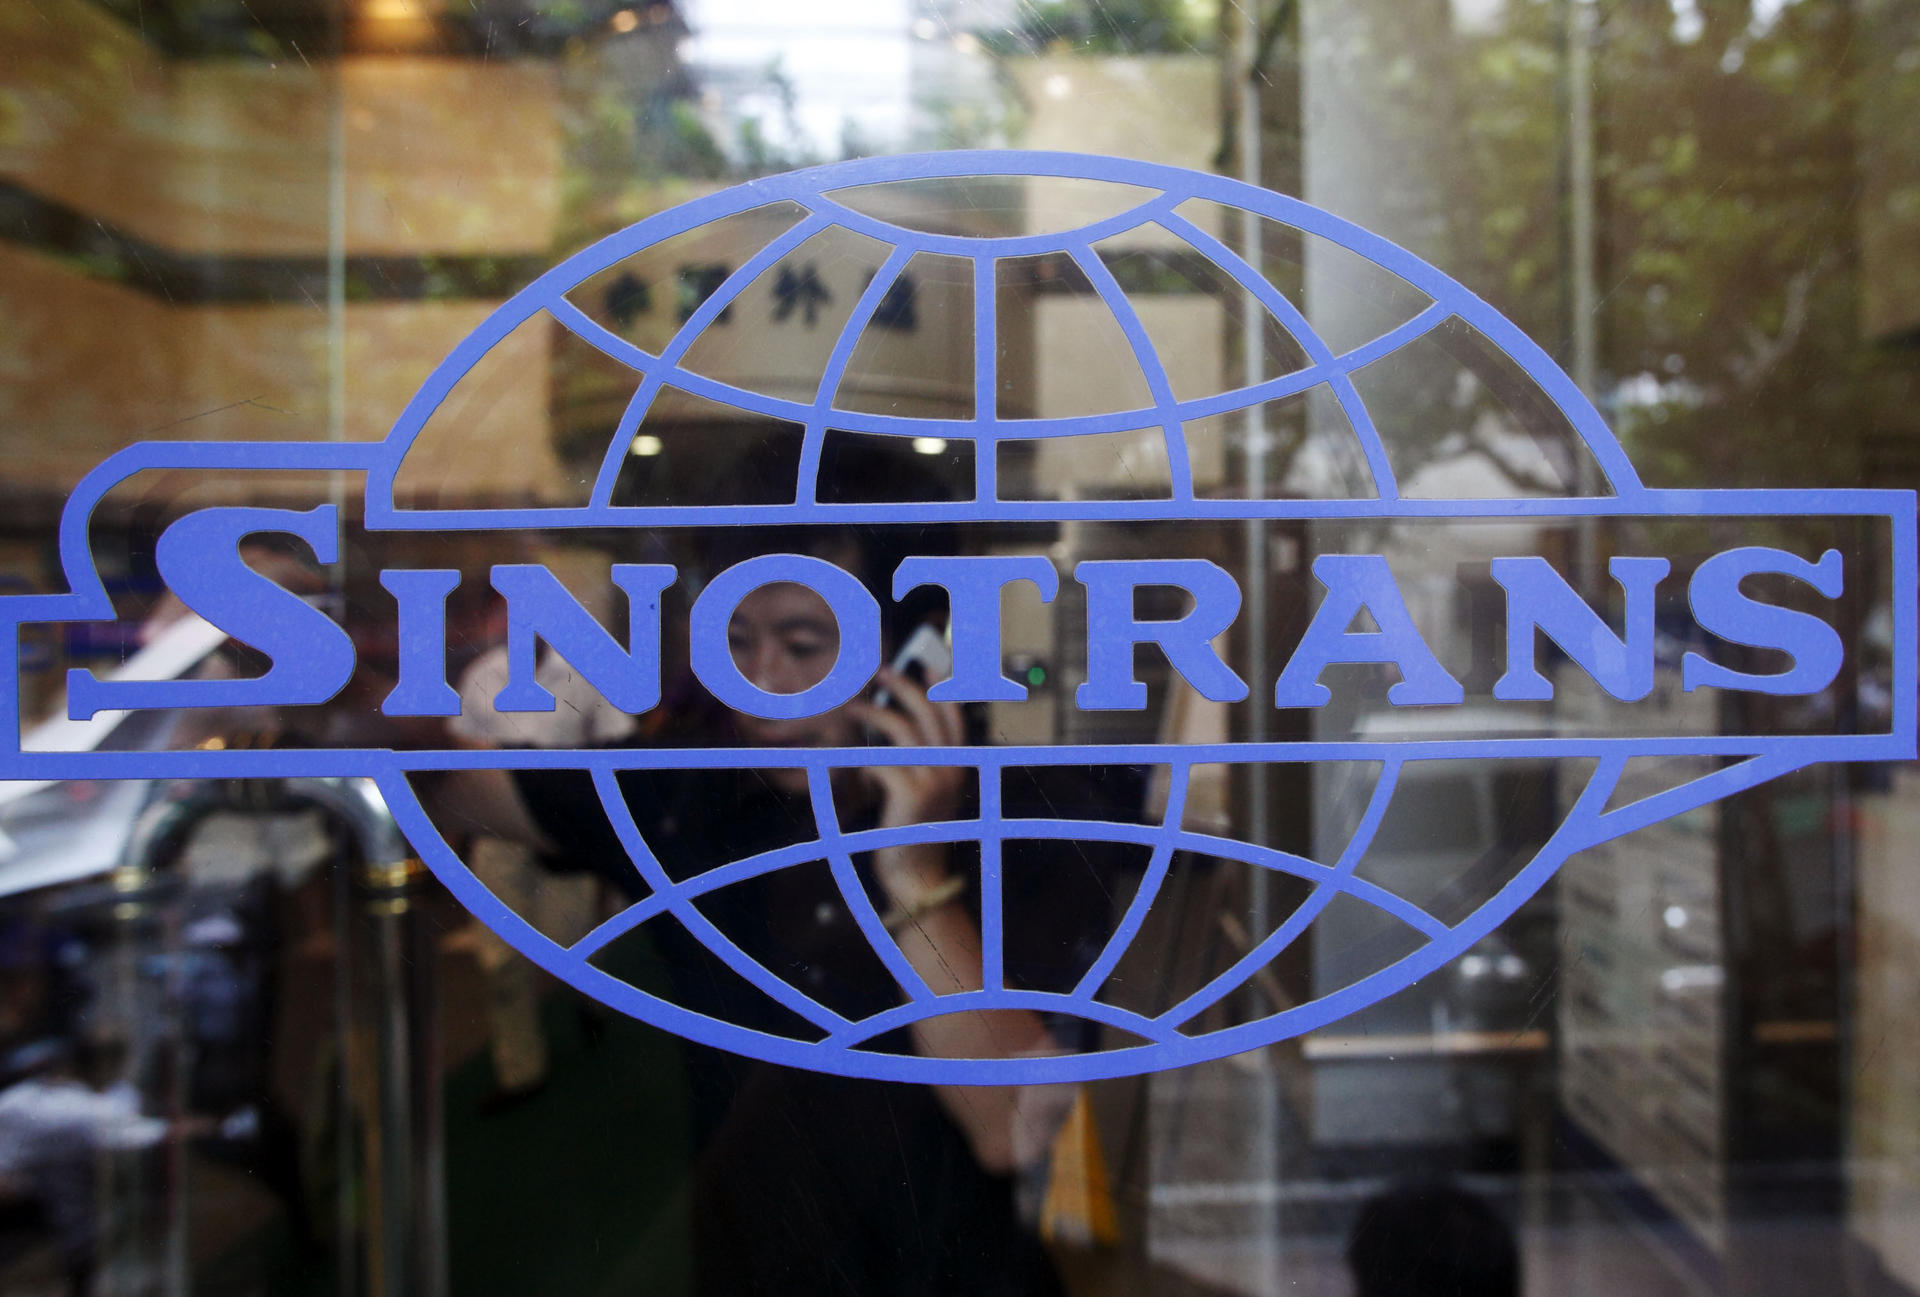 Sinotrans shares fell up to 28 per cent before suspension.